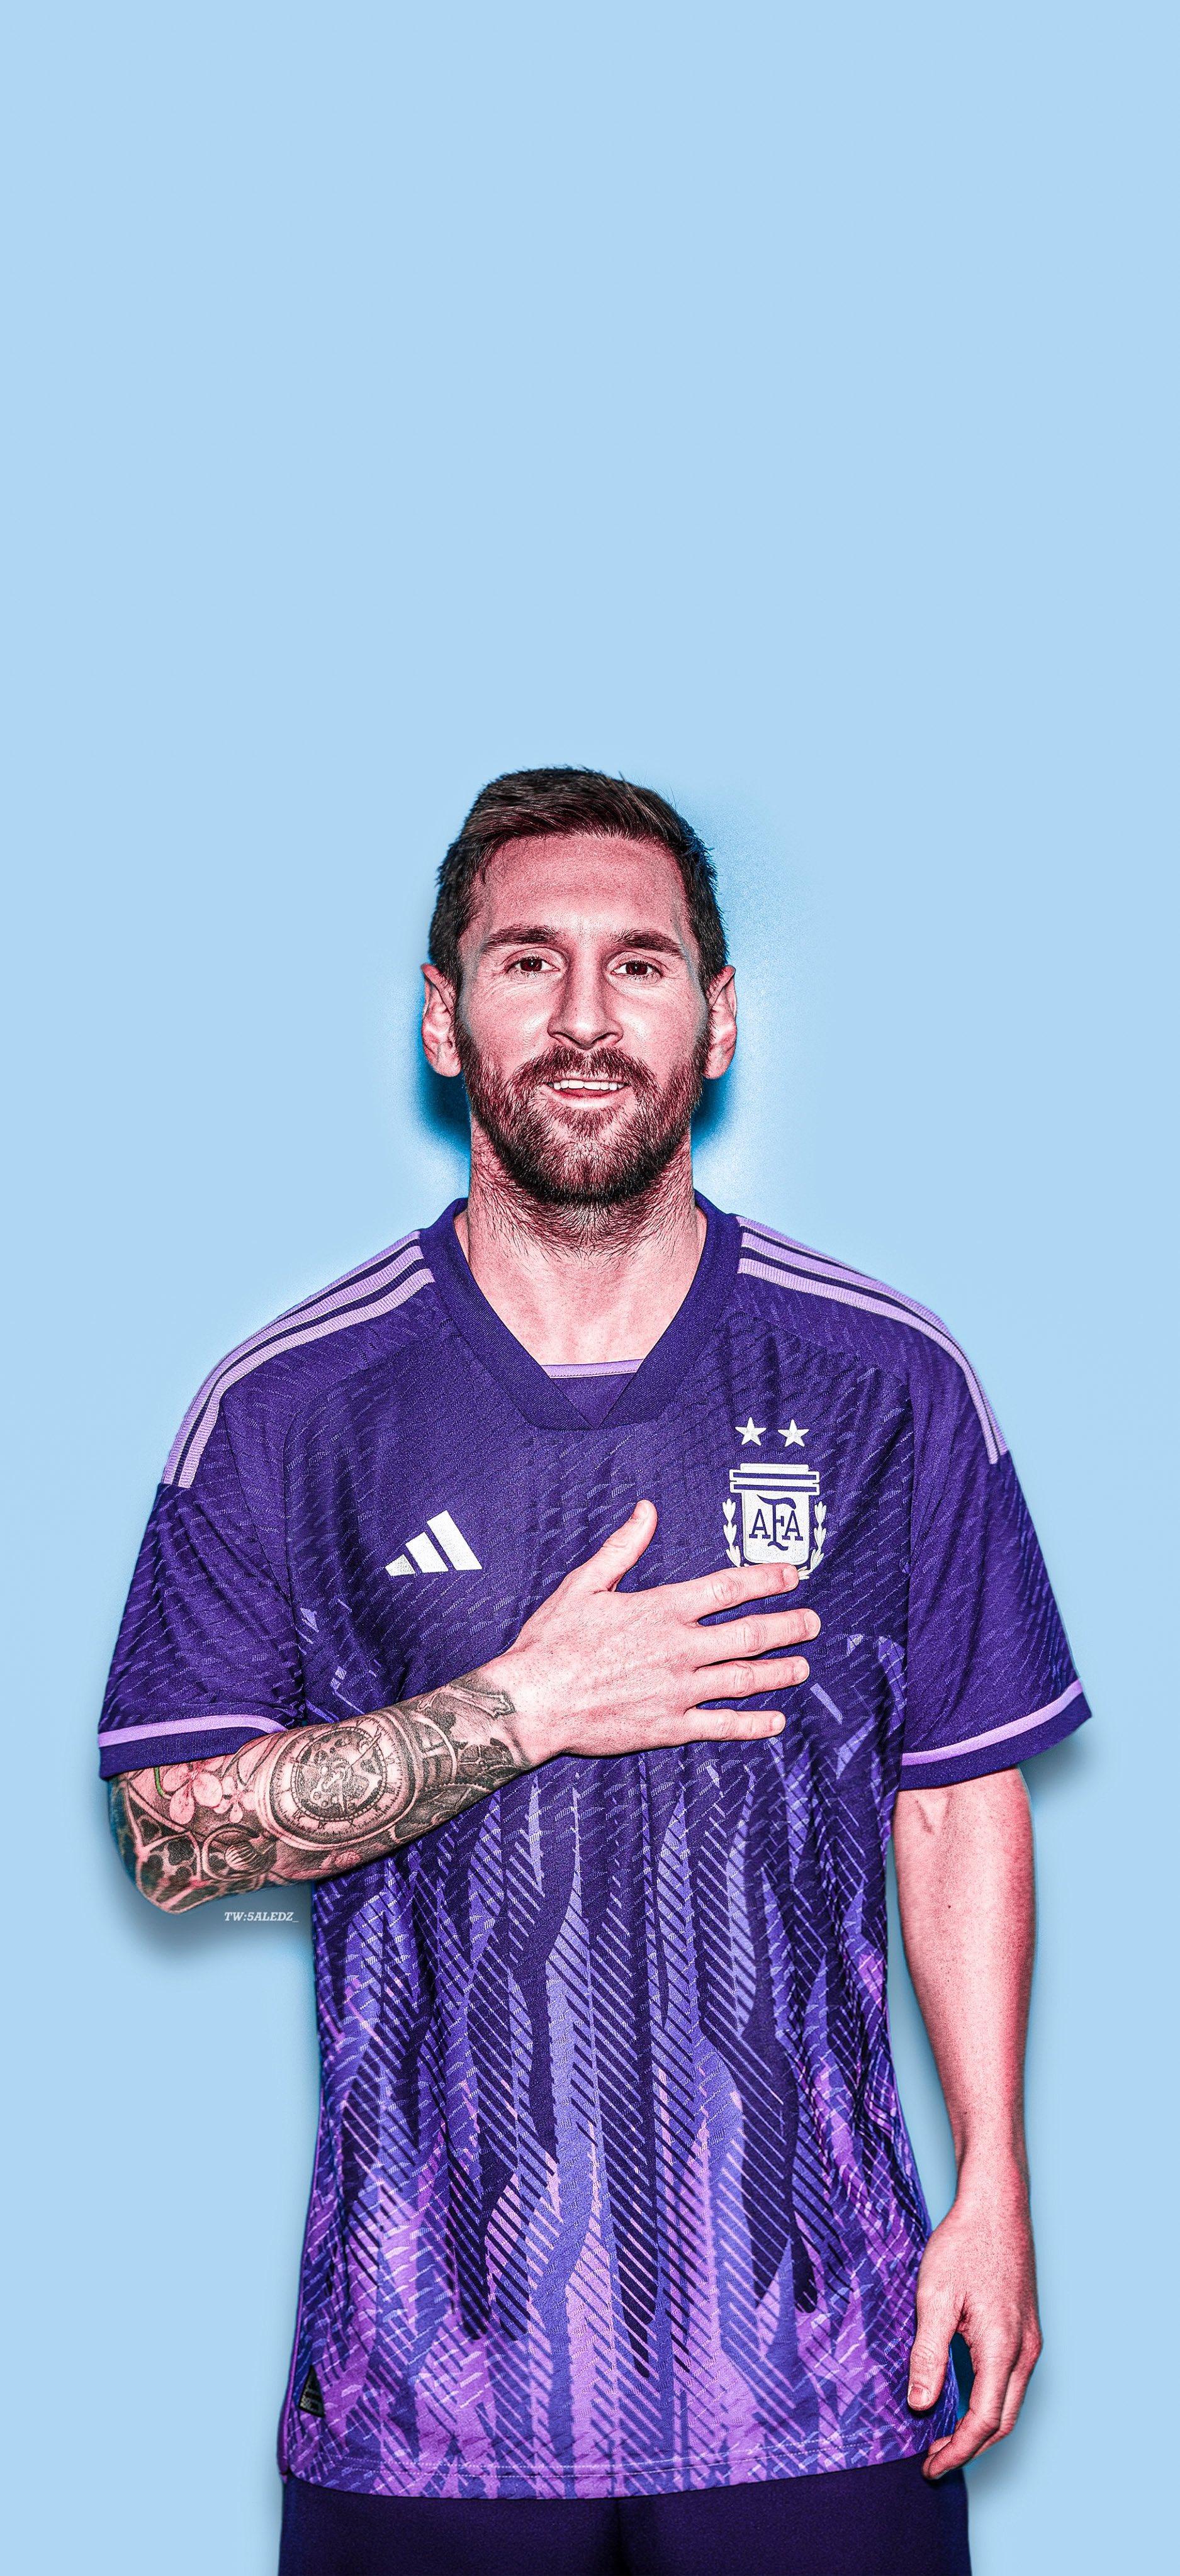 On 4k Lionel Messi Wearing The New Argentina